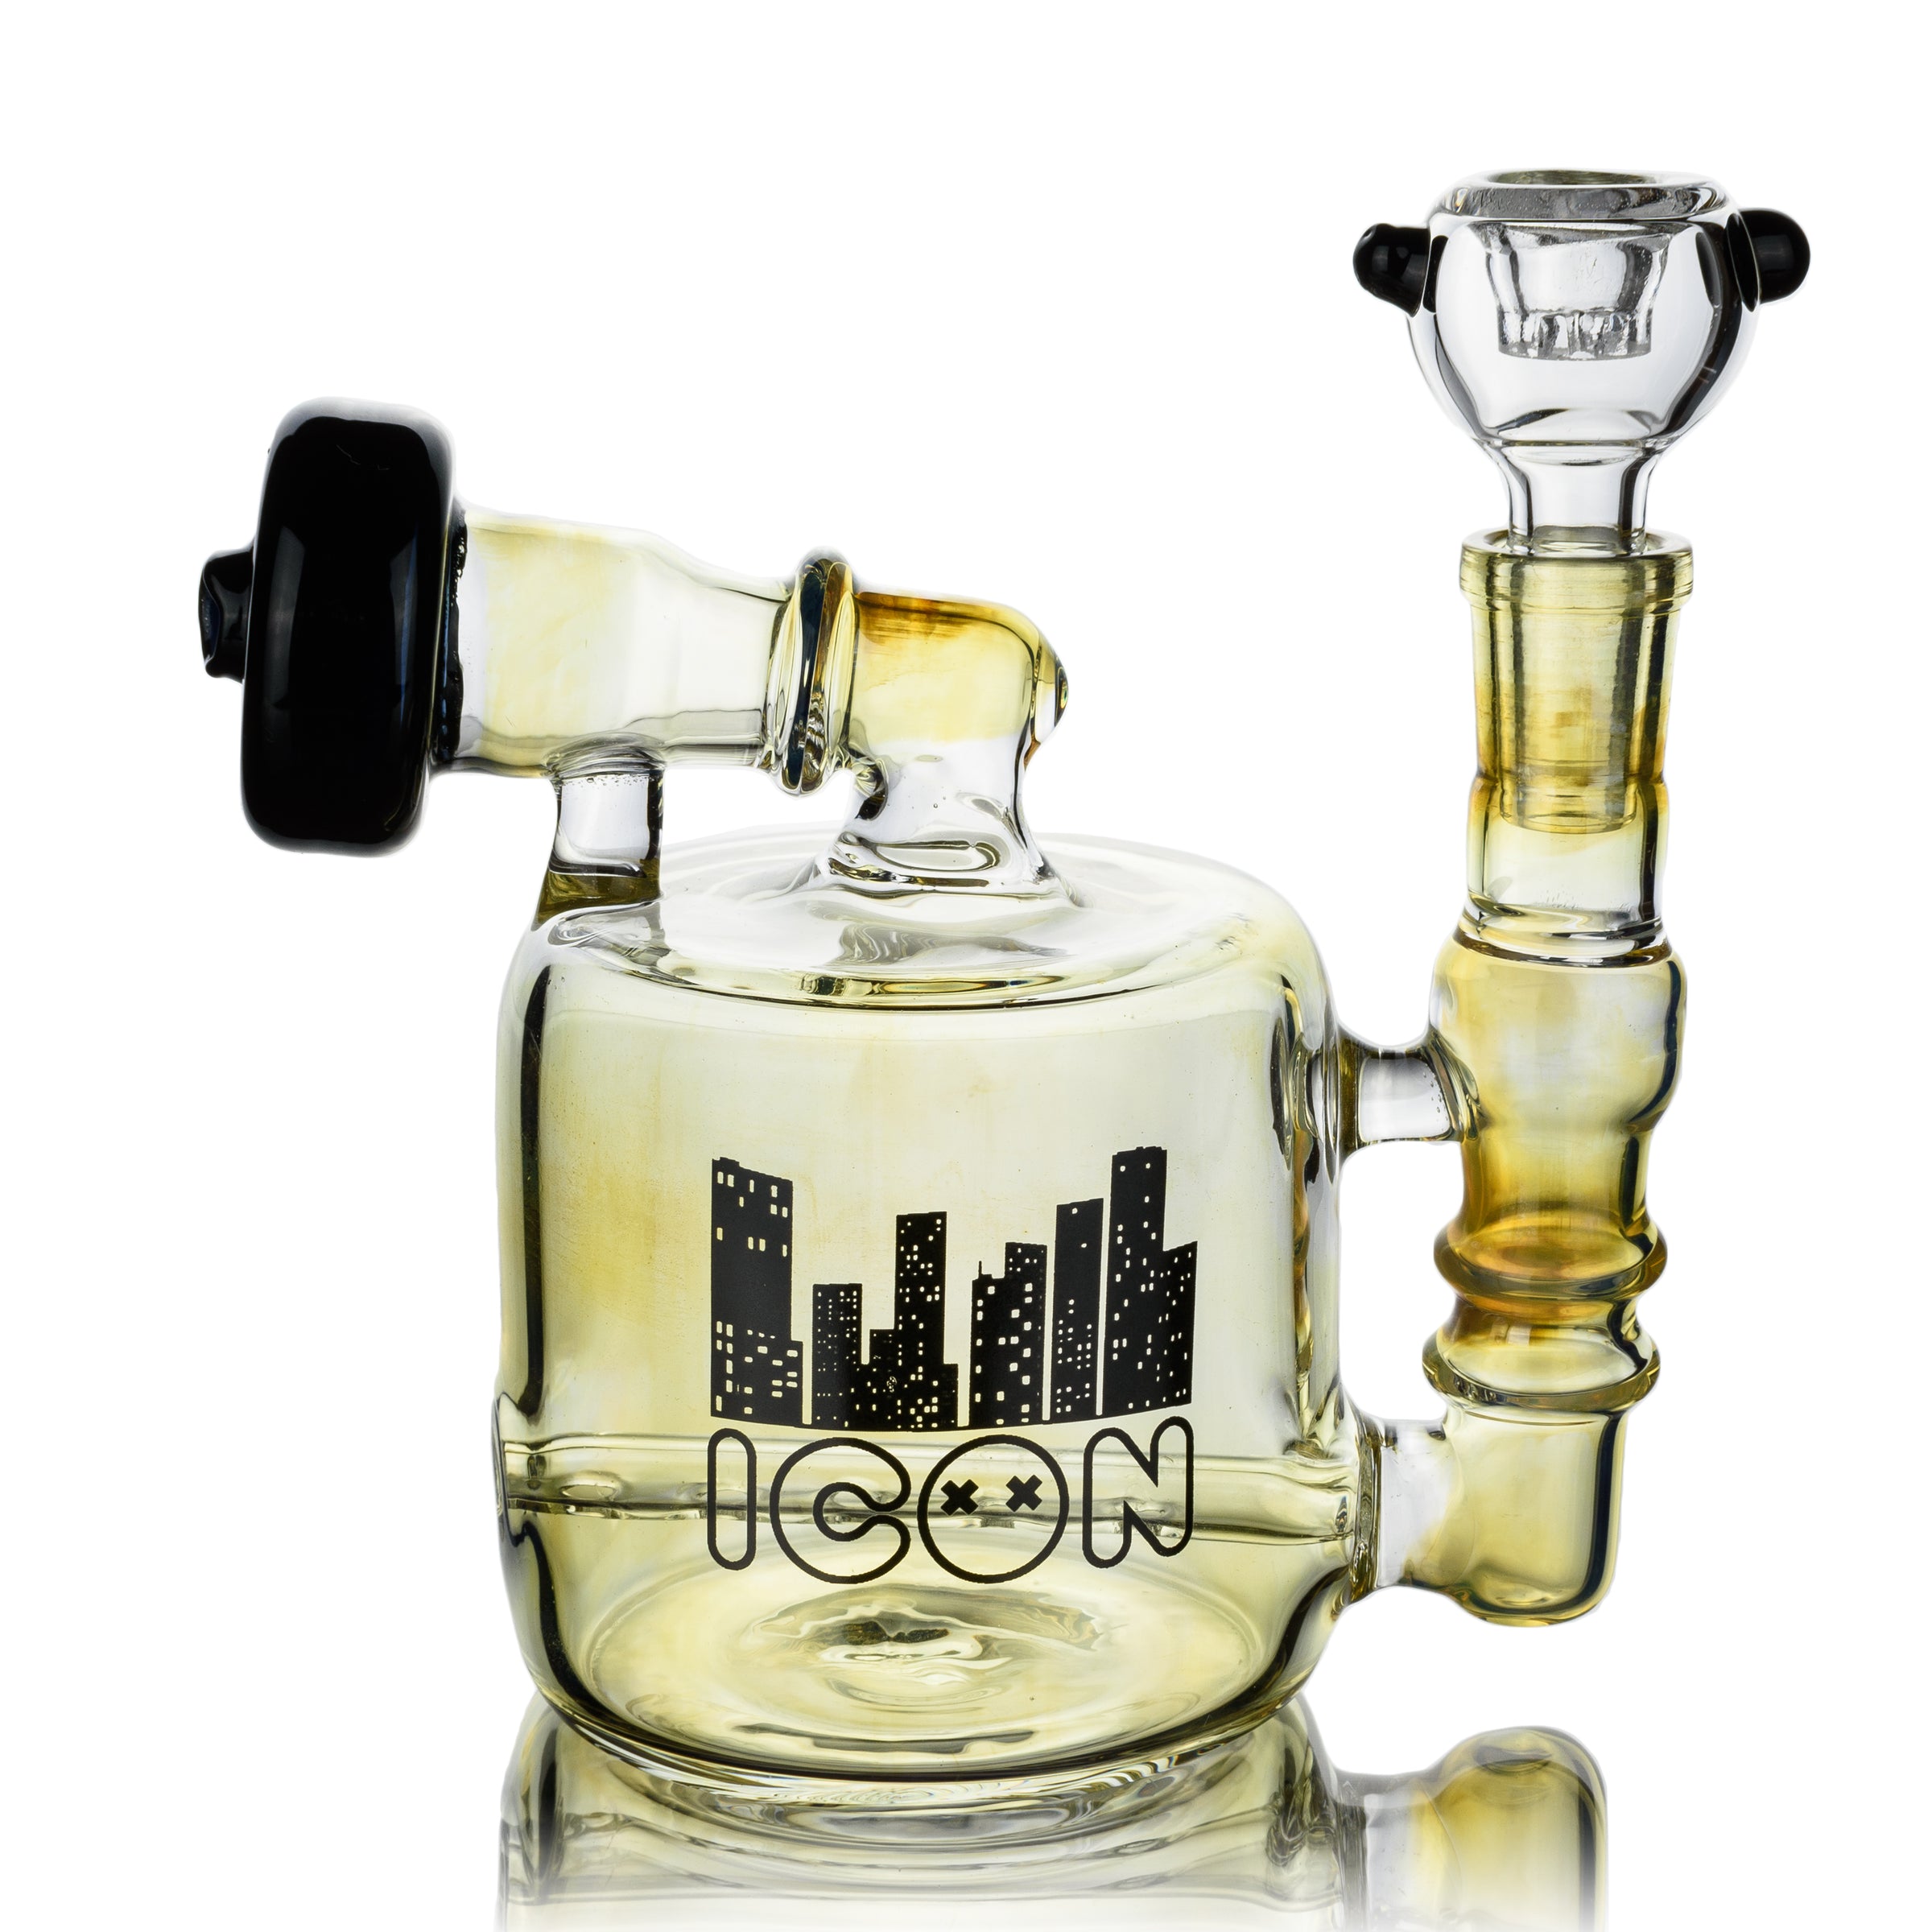 5" Cylinder Rig w/ Inline Diffuser, by Icon Glass (free banger included) - Bat Kountry